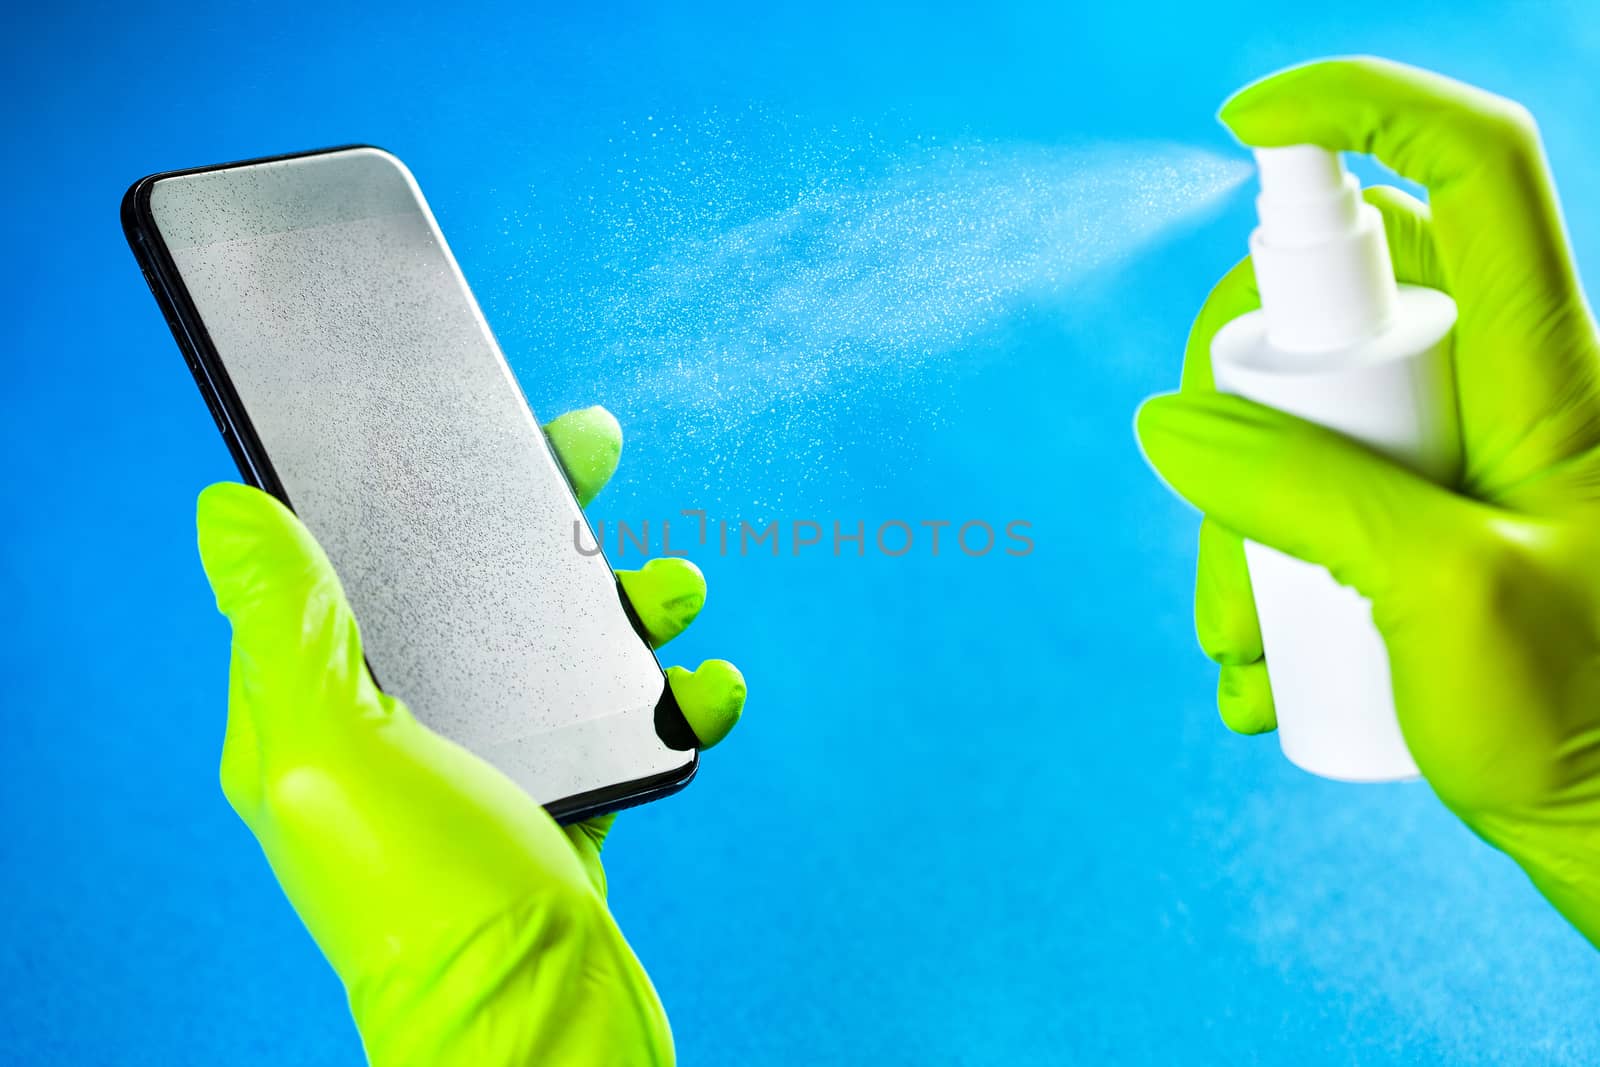 Hands in green gloves spraying antibacterial antiseptic sanitize by Plyushkin